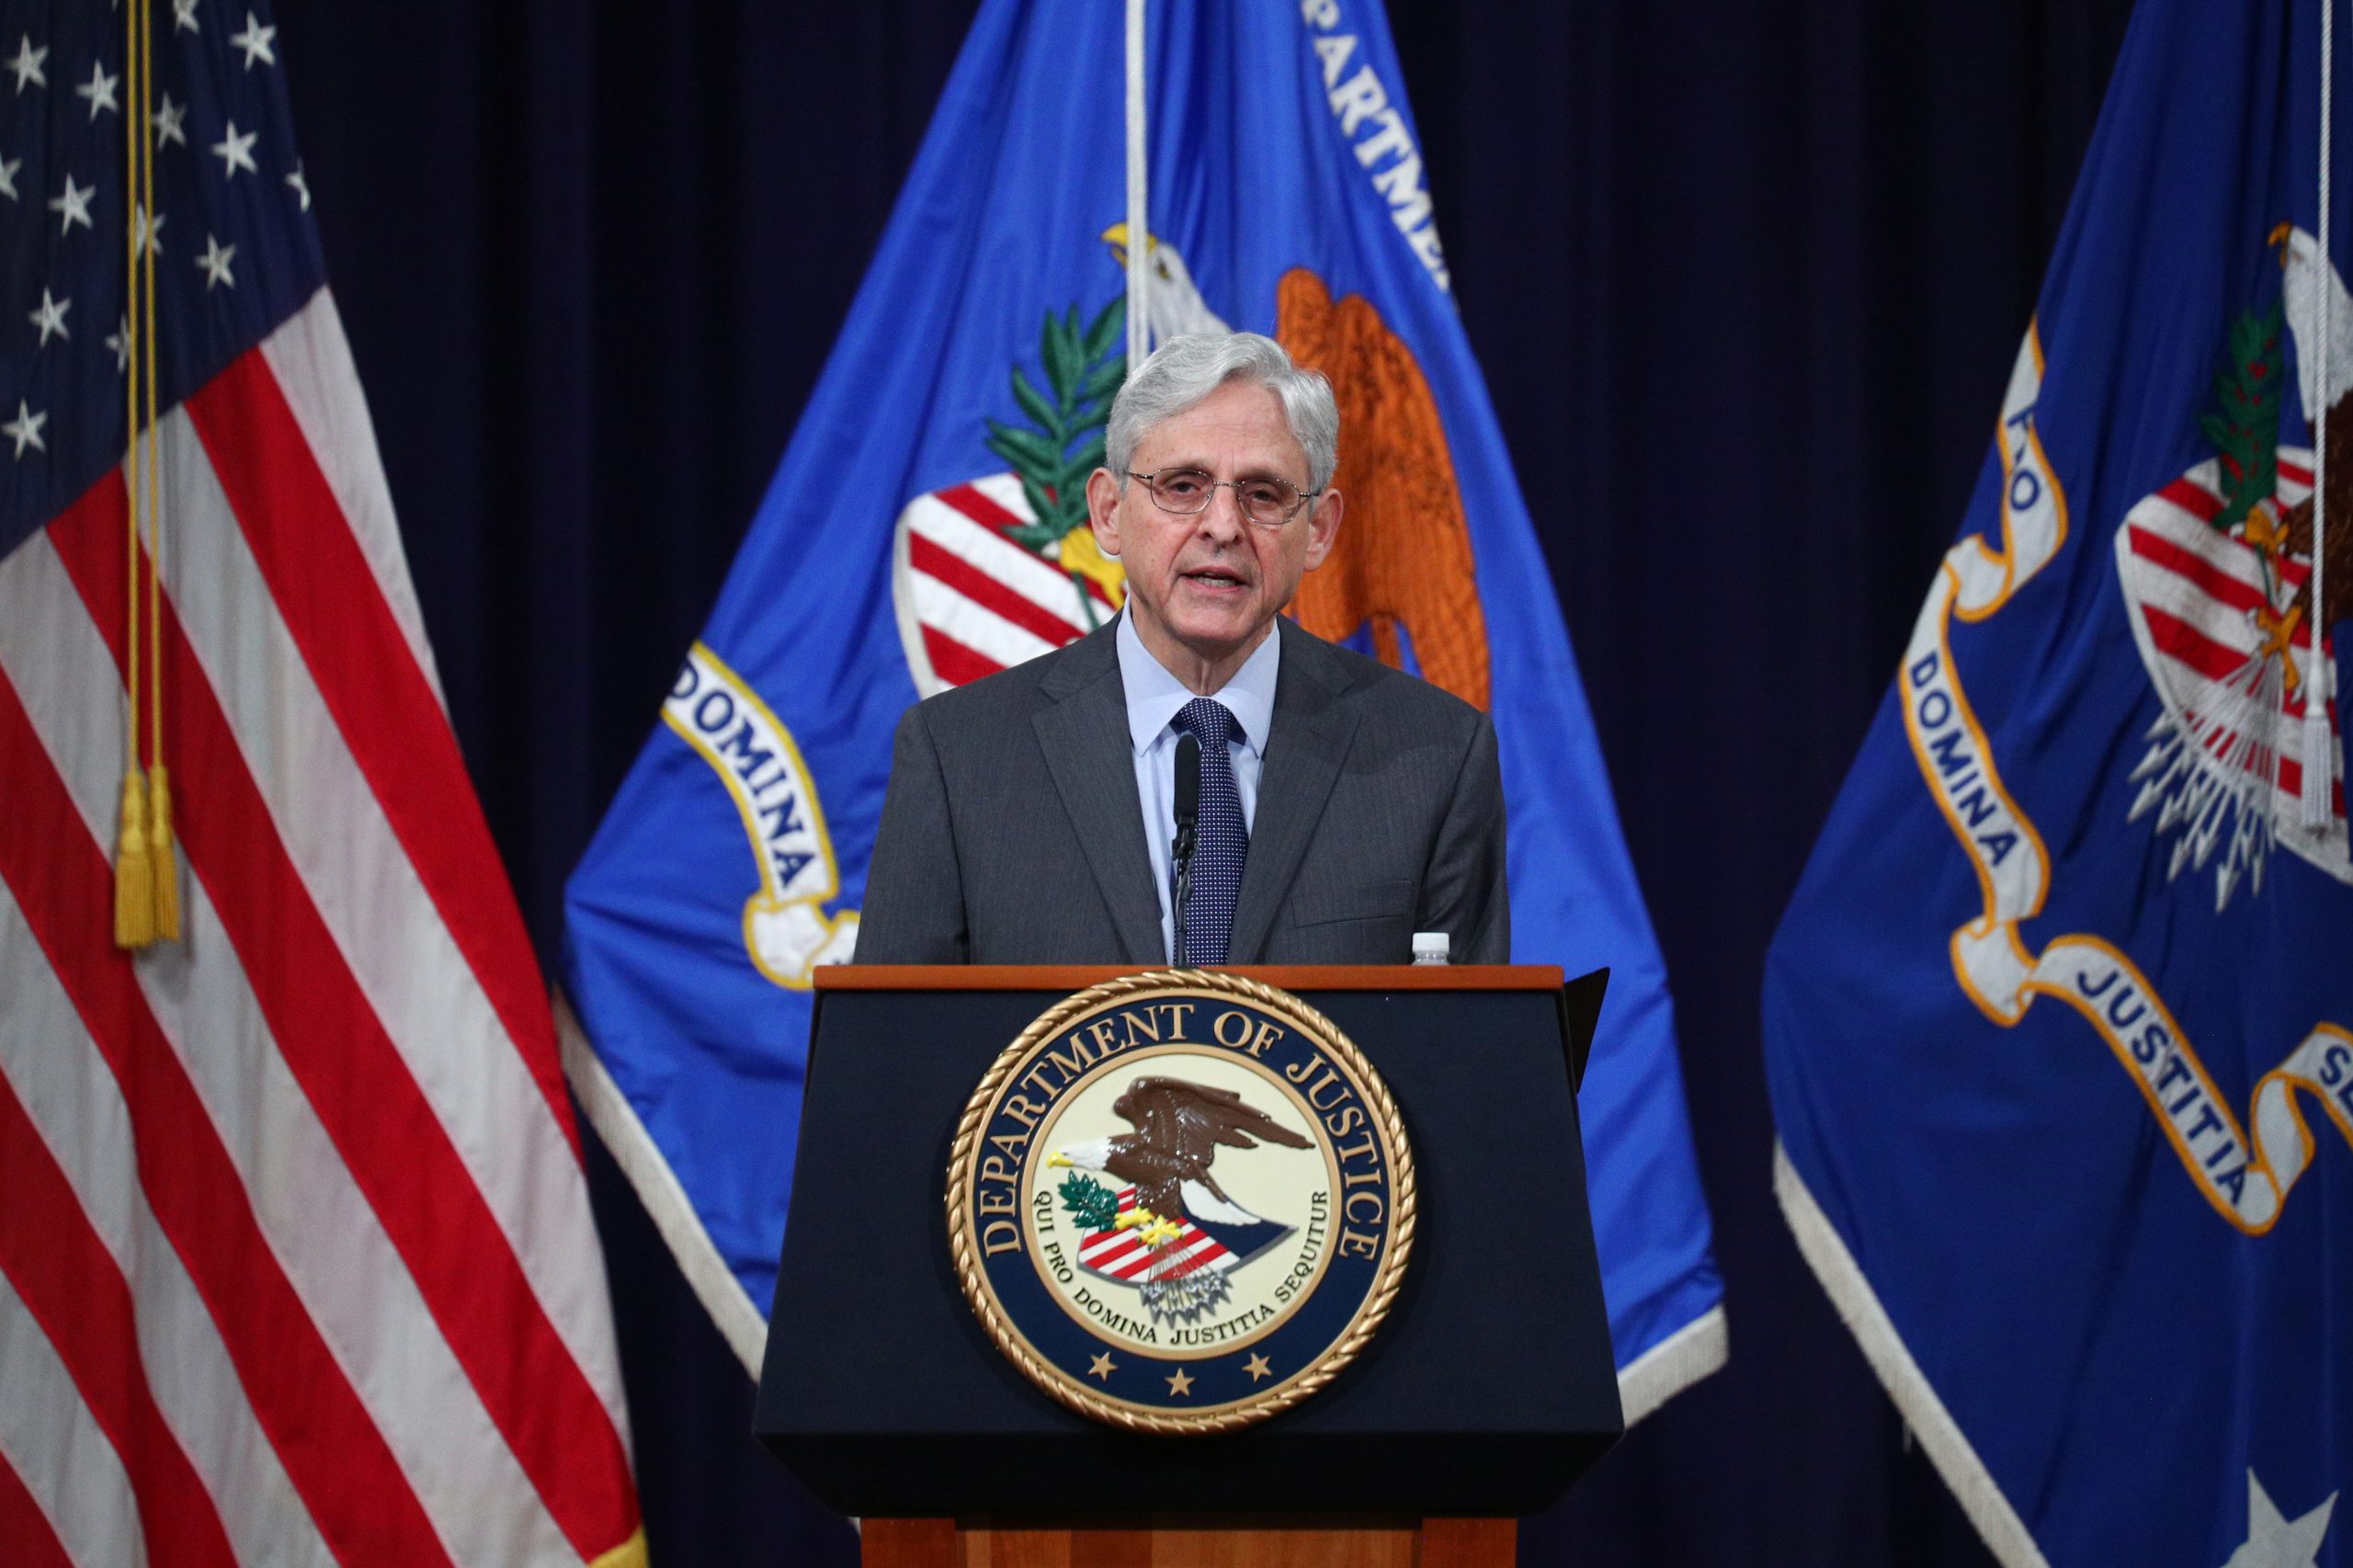 U.S. Attorney General Merrick Garland delivers remarks on voting rights at the U.S. Department of Justice in Washington